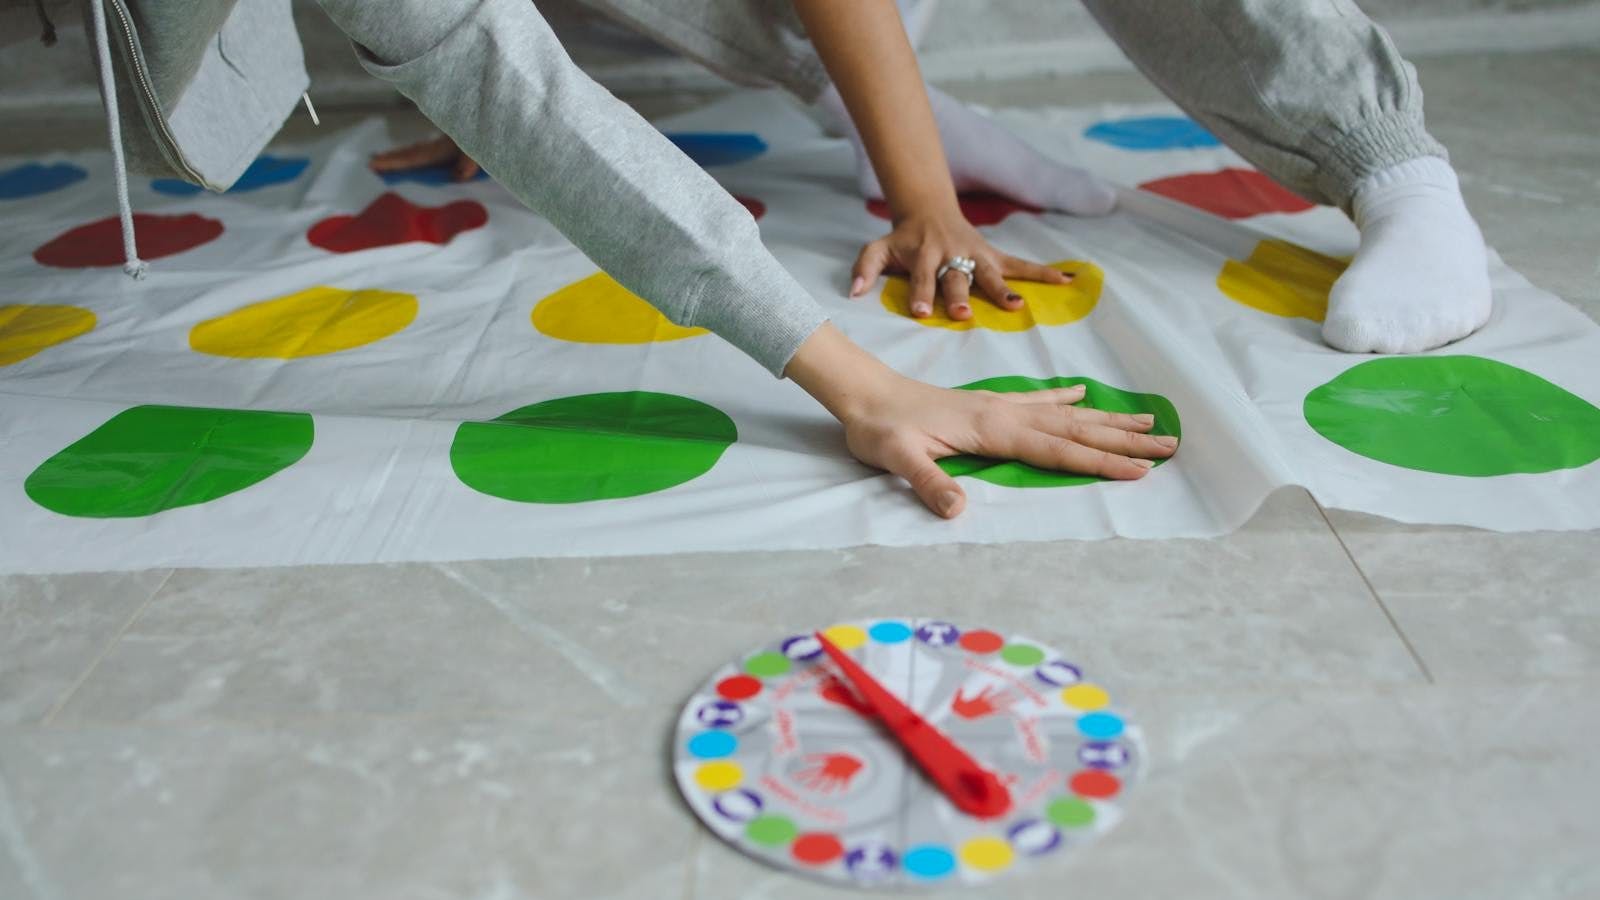 Hands on Persons on a Twister Mat